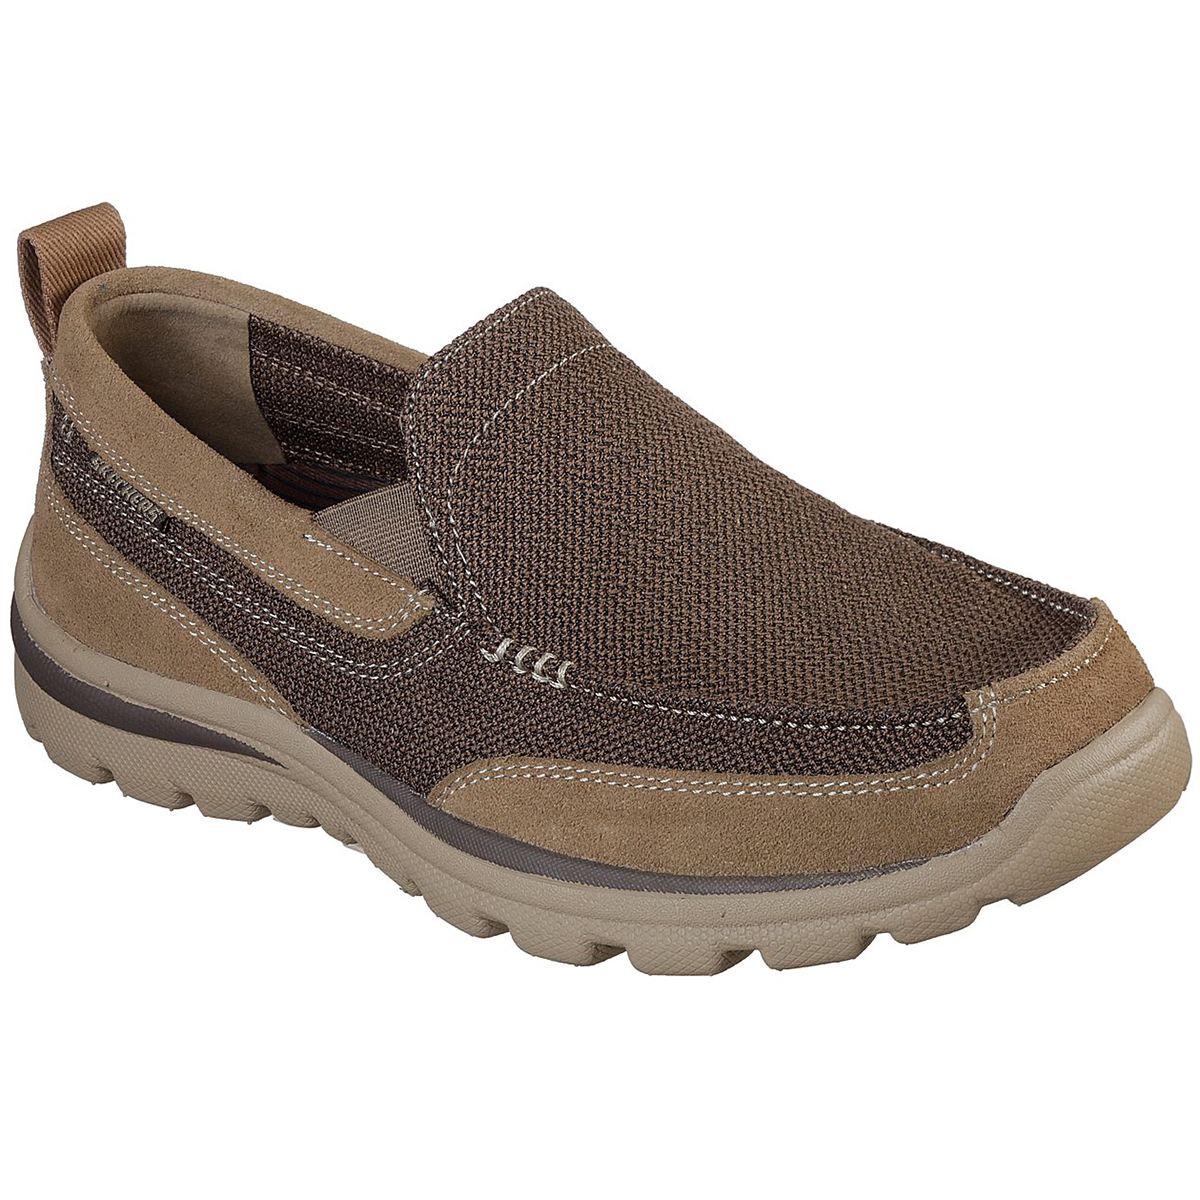 Skechers Men's Relaxed Fit Milford Slip On Shoes, Wide - Brown, 12